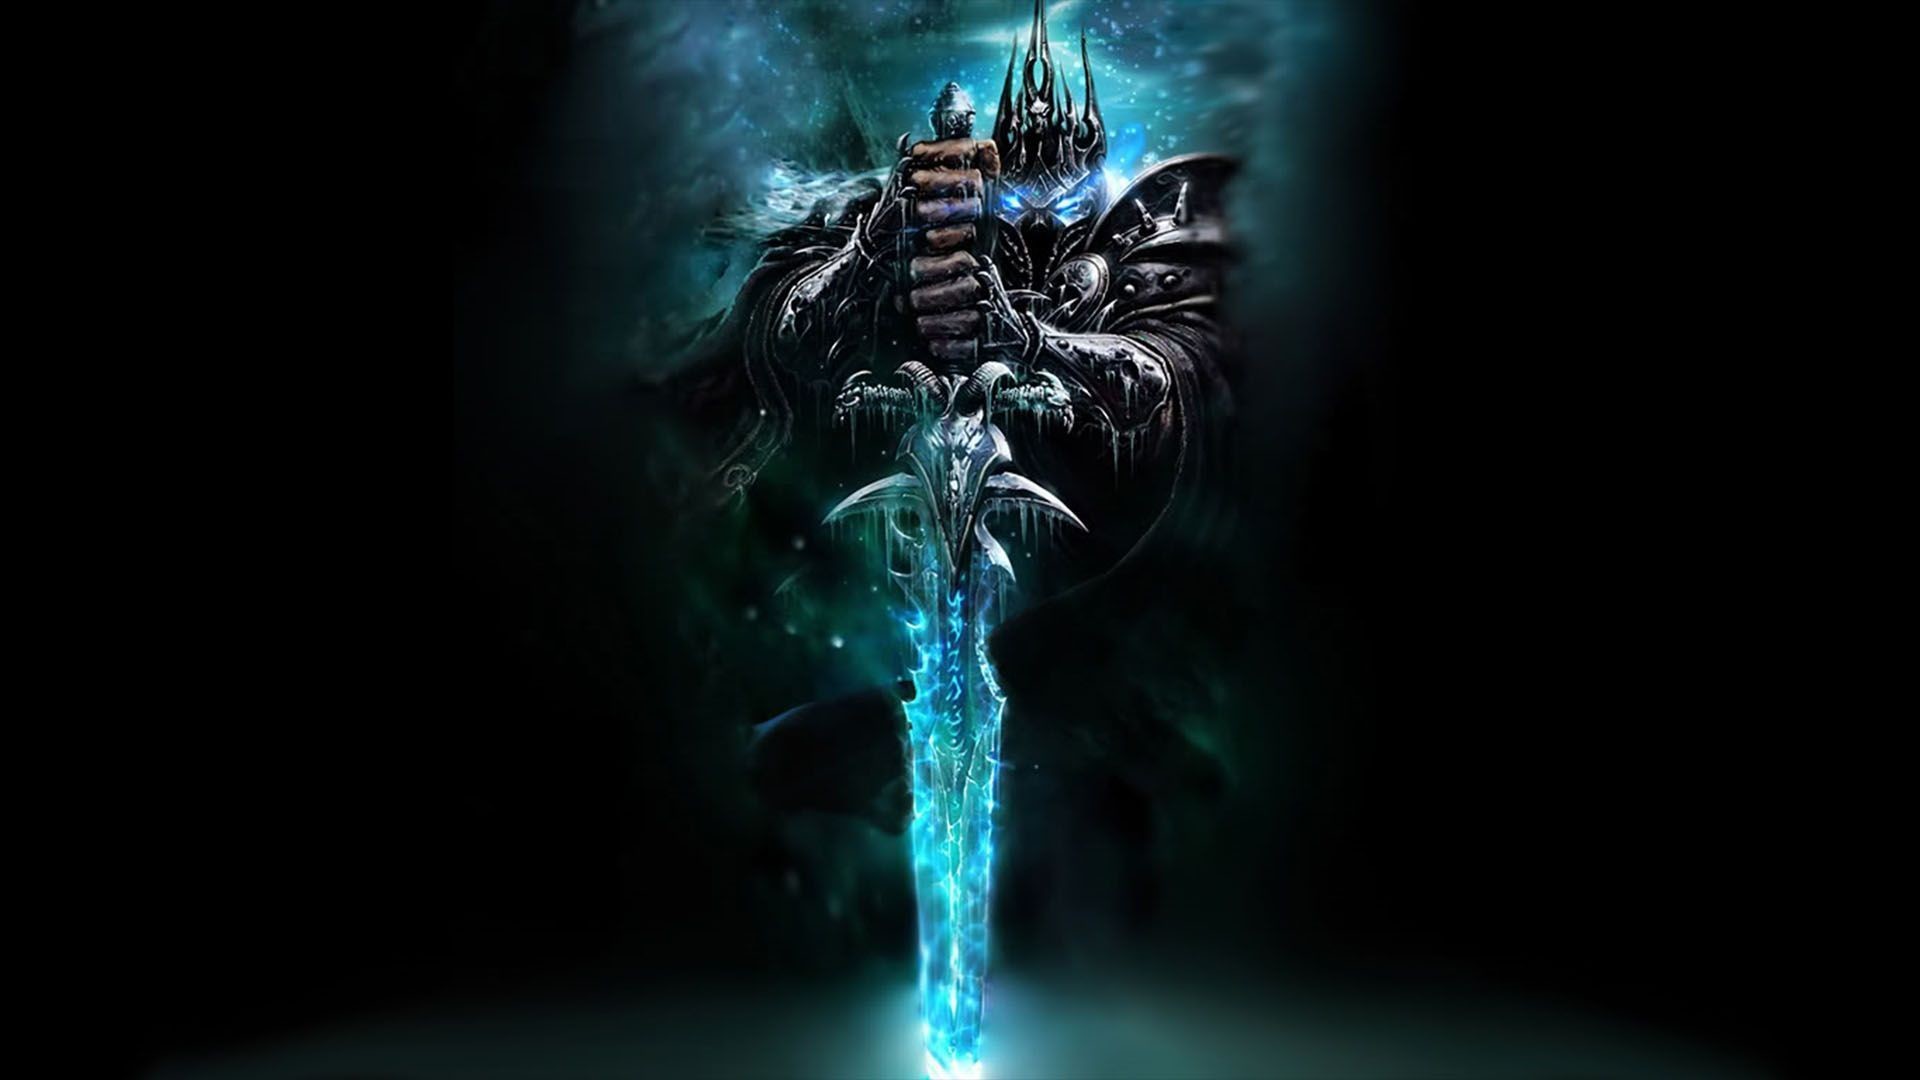 1920x1080 World of Warcraft Lich King and his Sword -  - Full HD 16 .